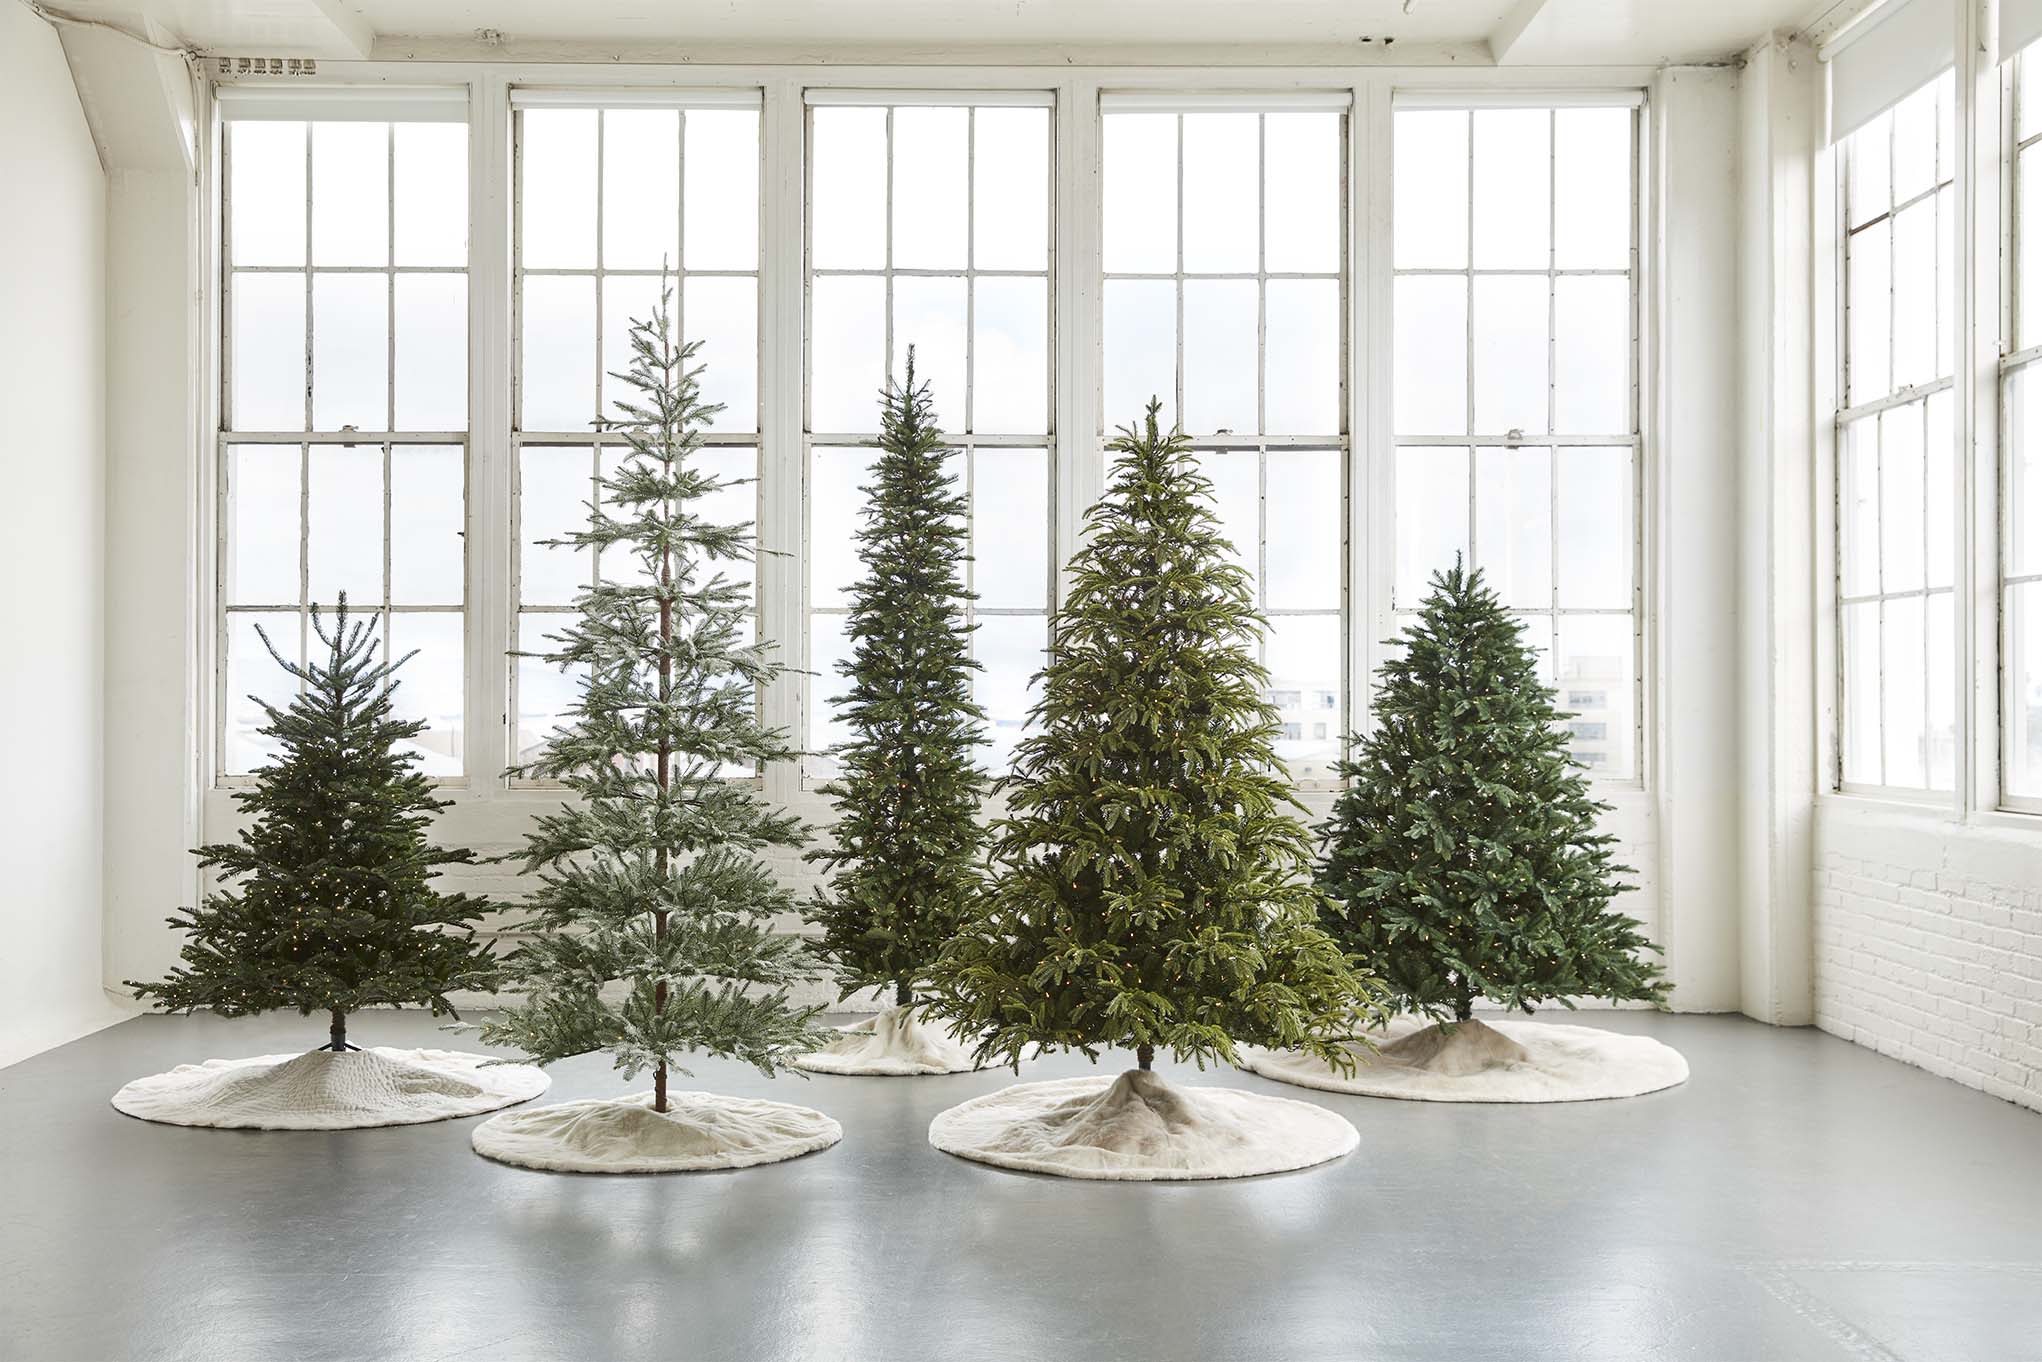 The American Christmas Tree Association, which represents manufacturers and retailers of real and artificial trees, says there are a lot of fun trends with artificial trees these days. And the trees are getting more realistic looking every year. CREDIT: COURTESY OF THE AMERICAN CHRISTMAS TREE ASSOCIATION